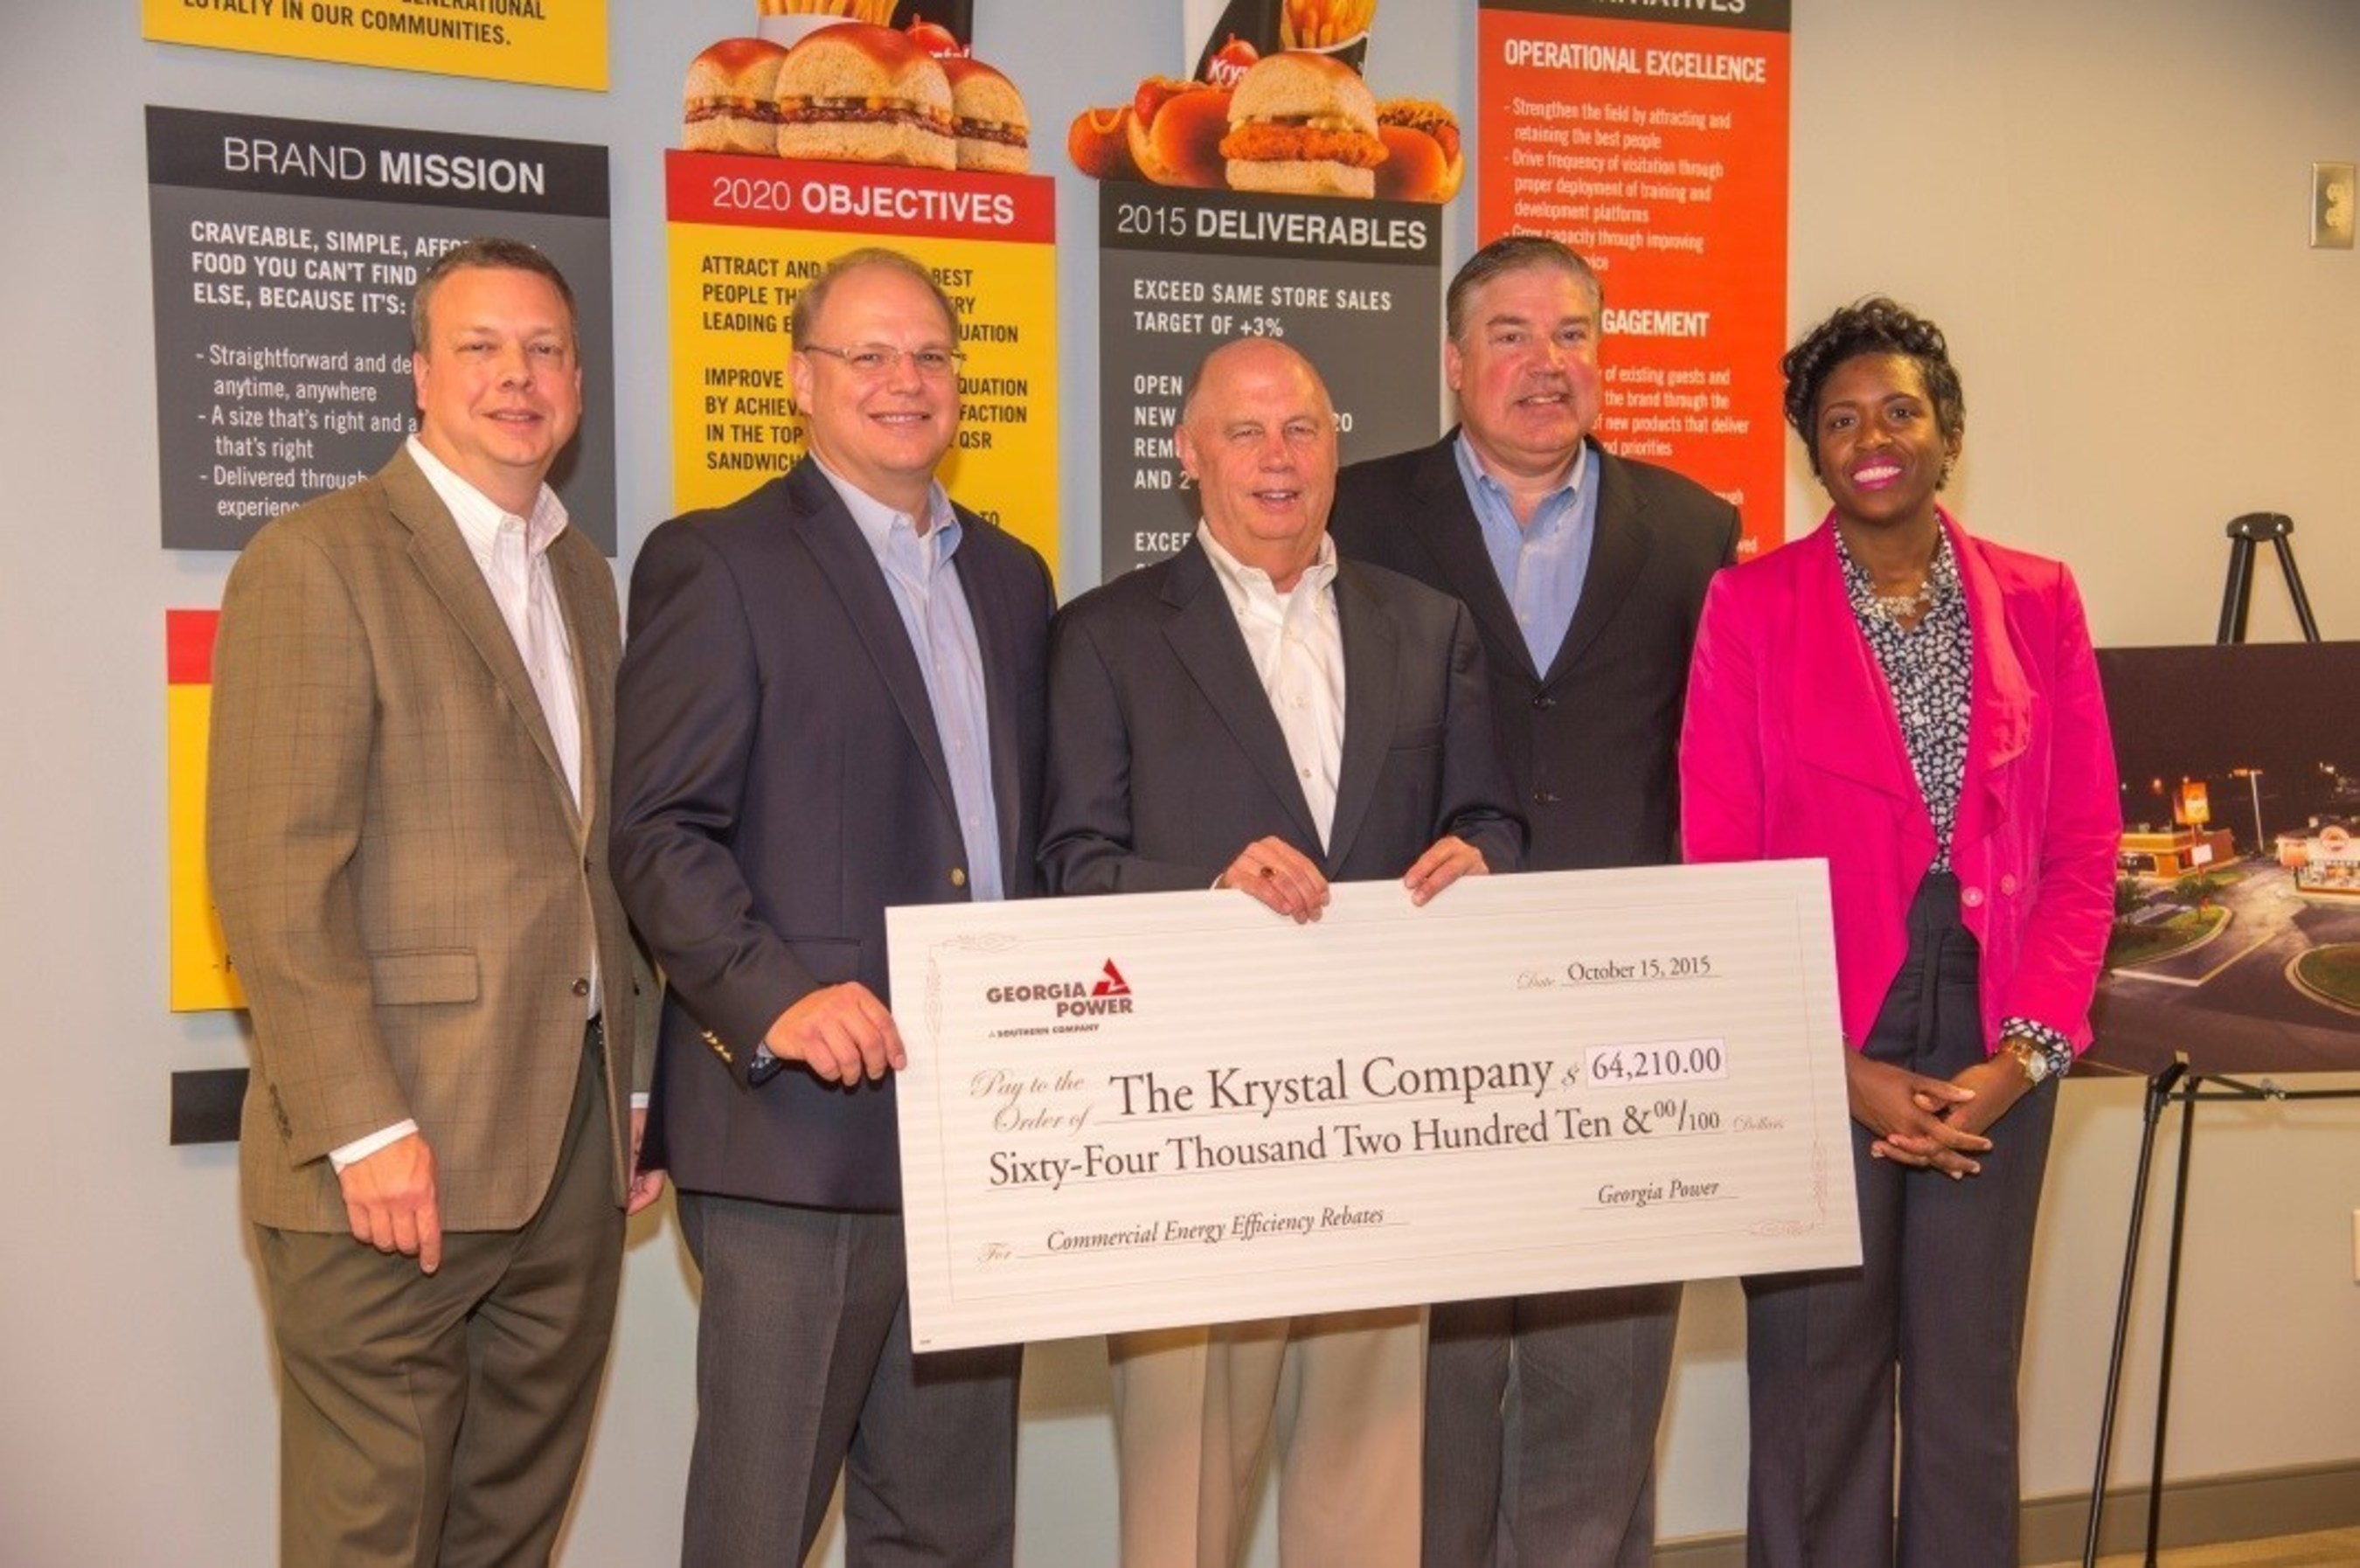 The Krystal(R) Company, known as the oldest quick service restaurant chain in the South, upgraded lighting fixtures at 55 restaurants to energy-efficient LEDs in an effort to improve customer experience and be more sustainable.  Georgia Power presented Krystal with a $64,000+ rebate check in October 2015.